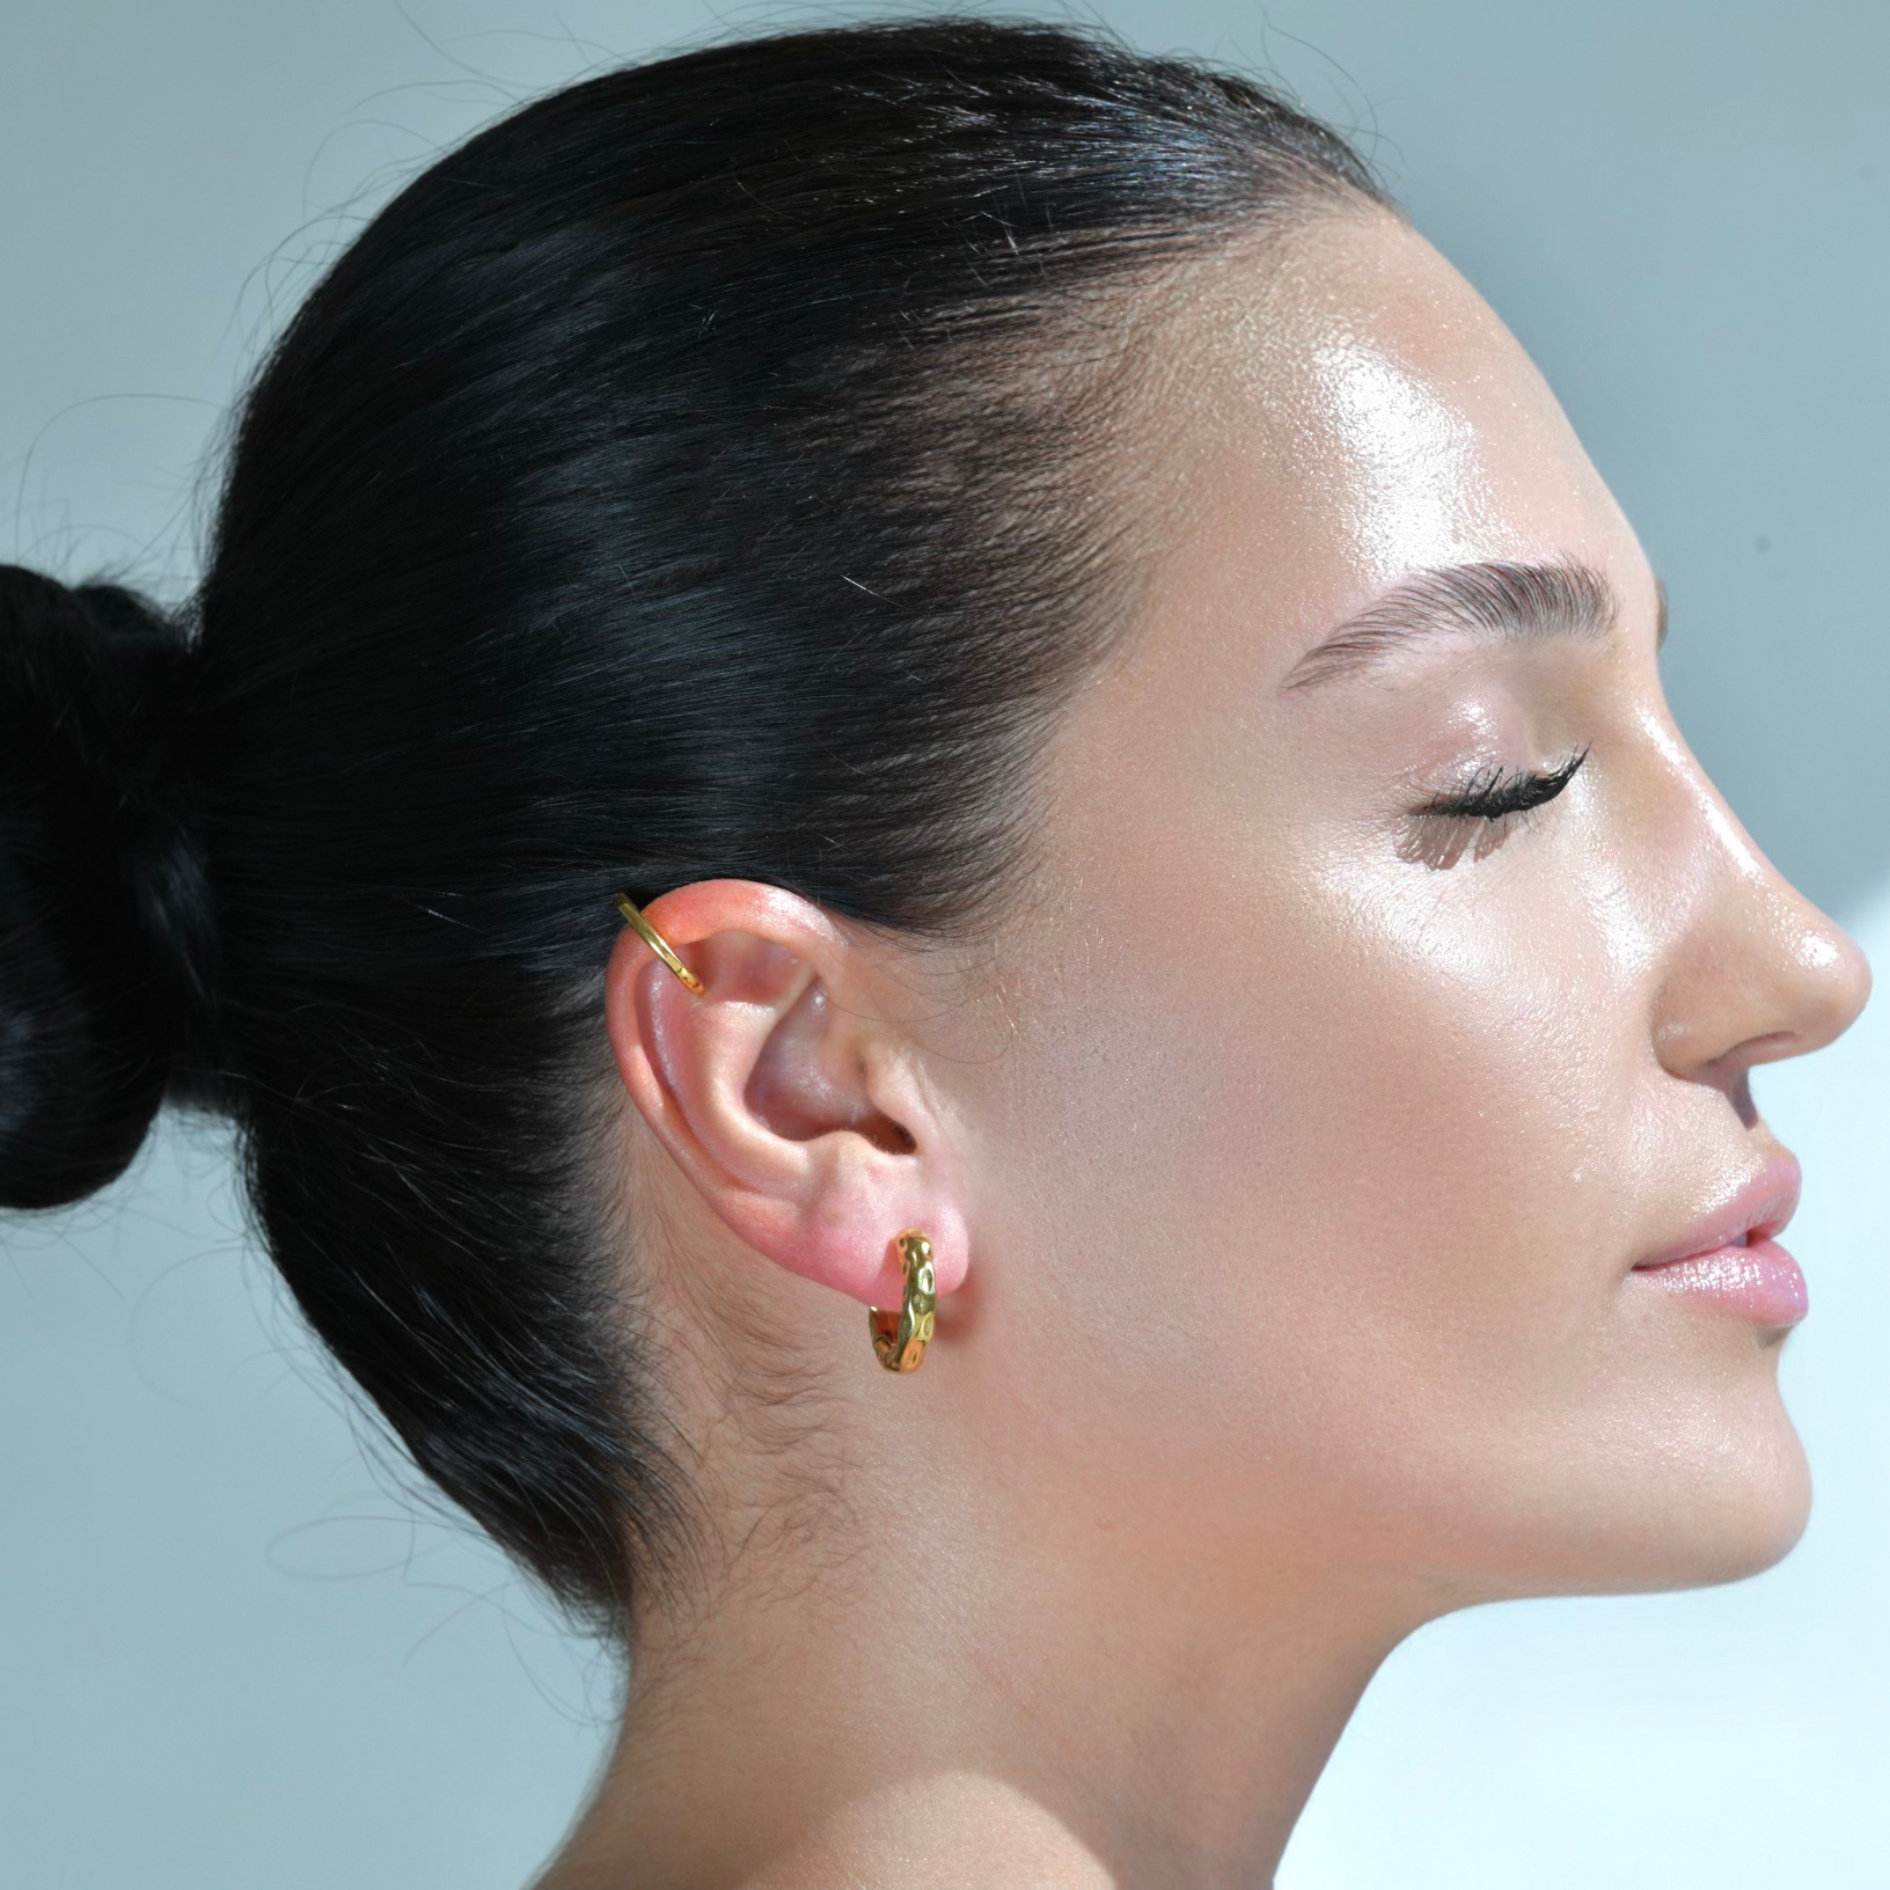 Gold Plated Half Hoop Earrings, Irregular shape resembling the water drops on a dune desert surface, white pearls added in every earring. Model wearing the earrings.